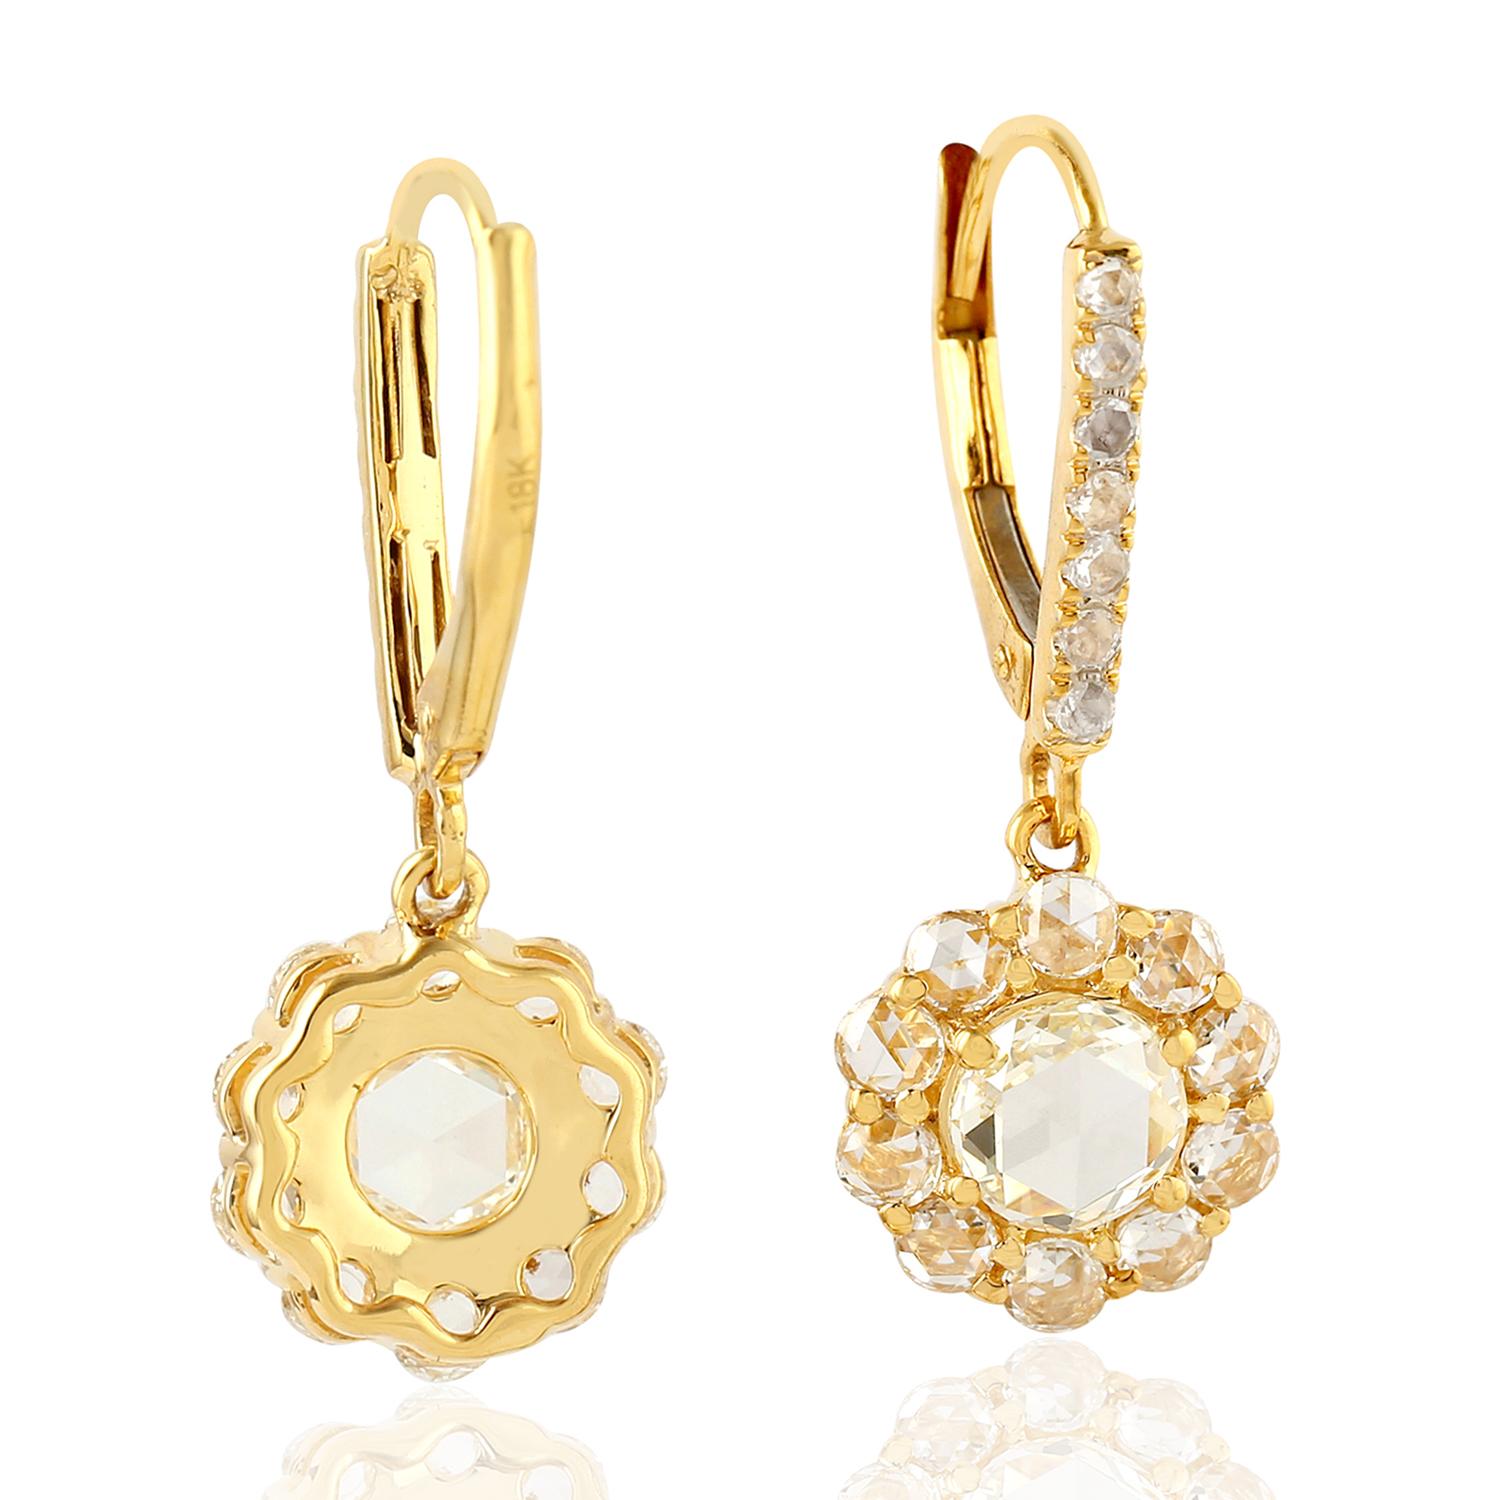 These rose cut diamond earrings are handmade in 18-karat gold and encrusted with 1.84 carats of diamonds. 

FOLLOW  MEGHNA JEWELS storefront to view the latest collection & exclusive pieces.  Meghna Jewels is proudly rated as a Top Seller on 1stdibs